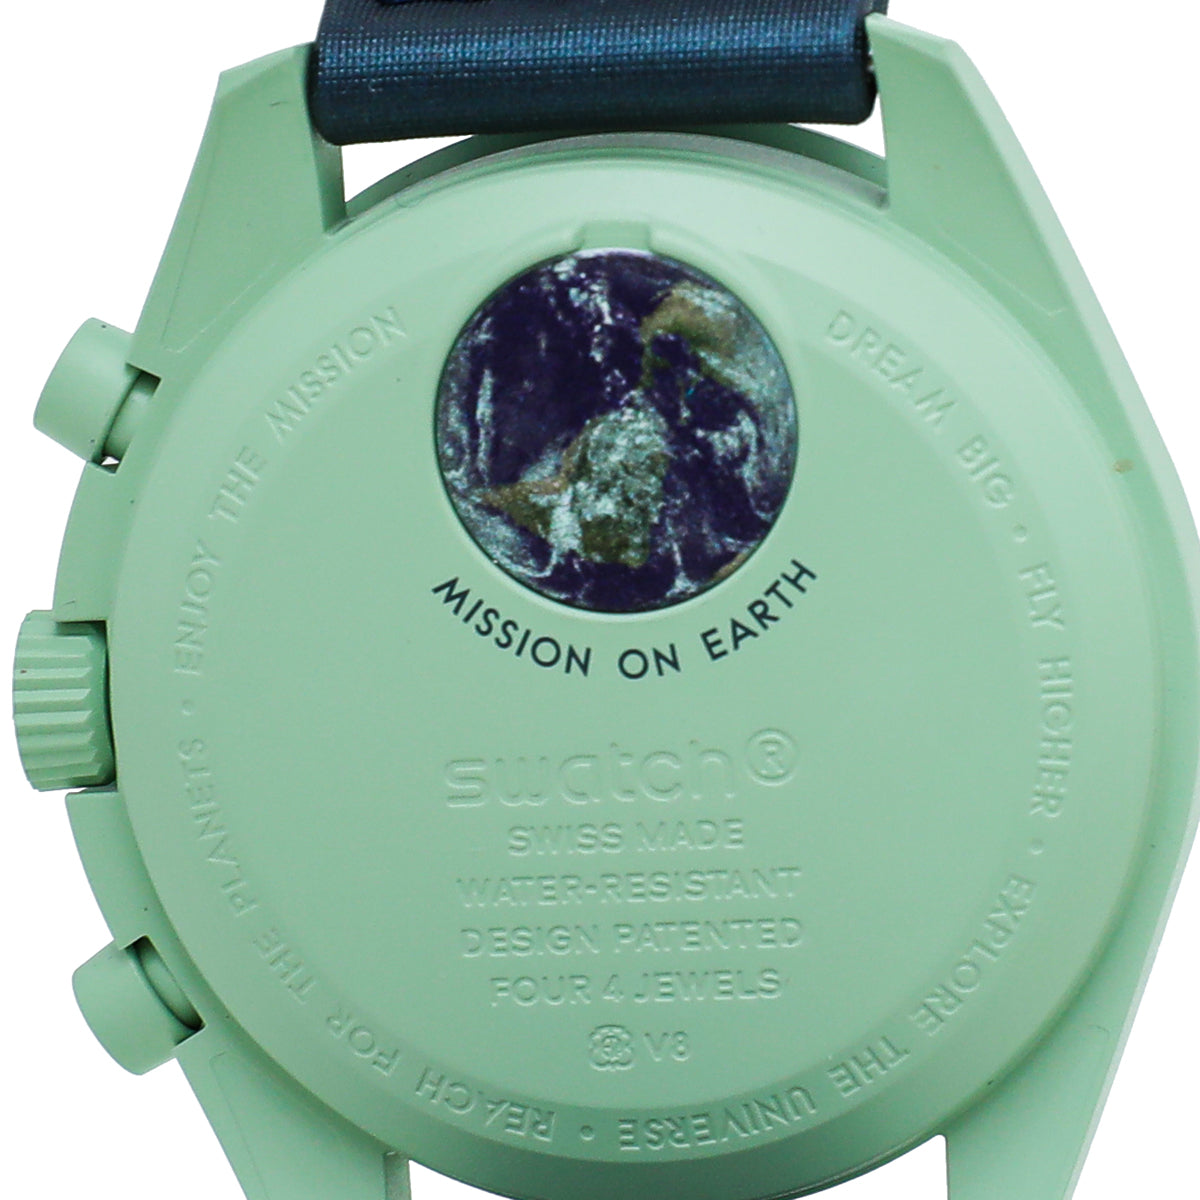 Omega Bicolor X Swatch Speedmaster Moonswatch Mission On Earth 42mm Swatch Watch